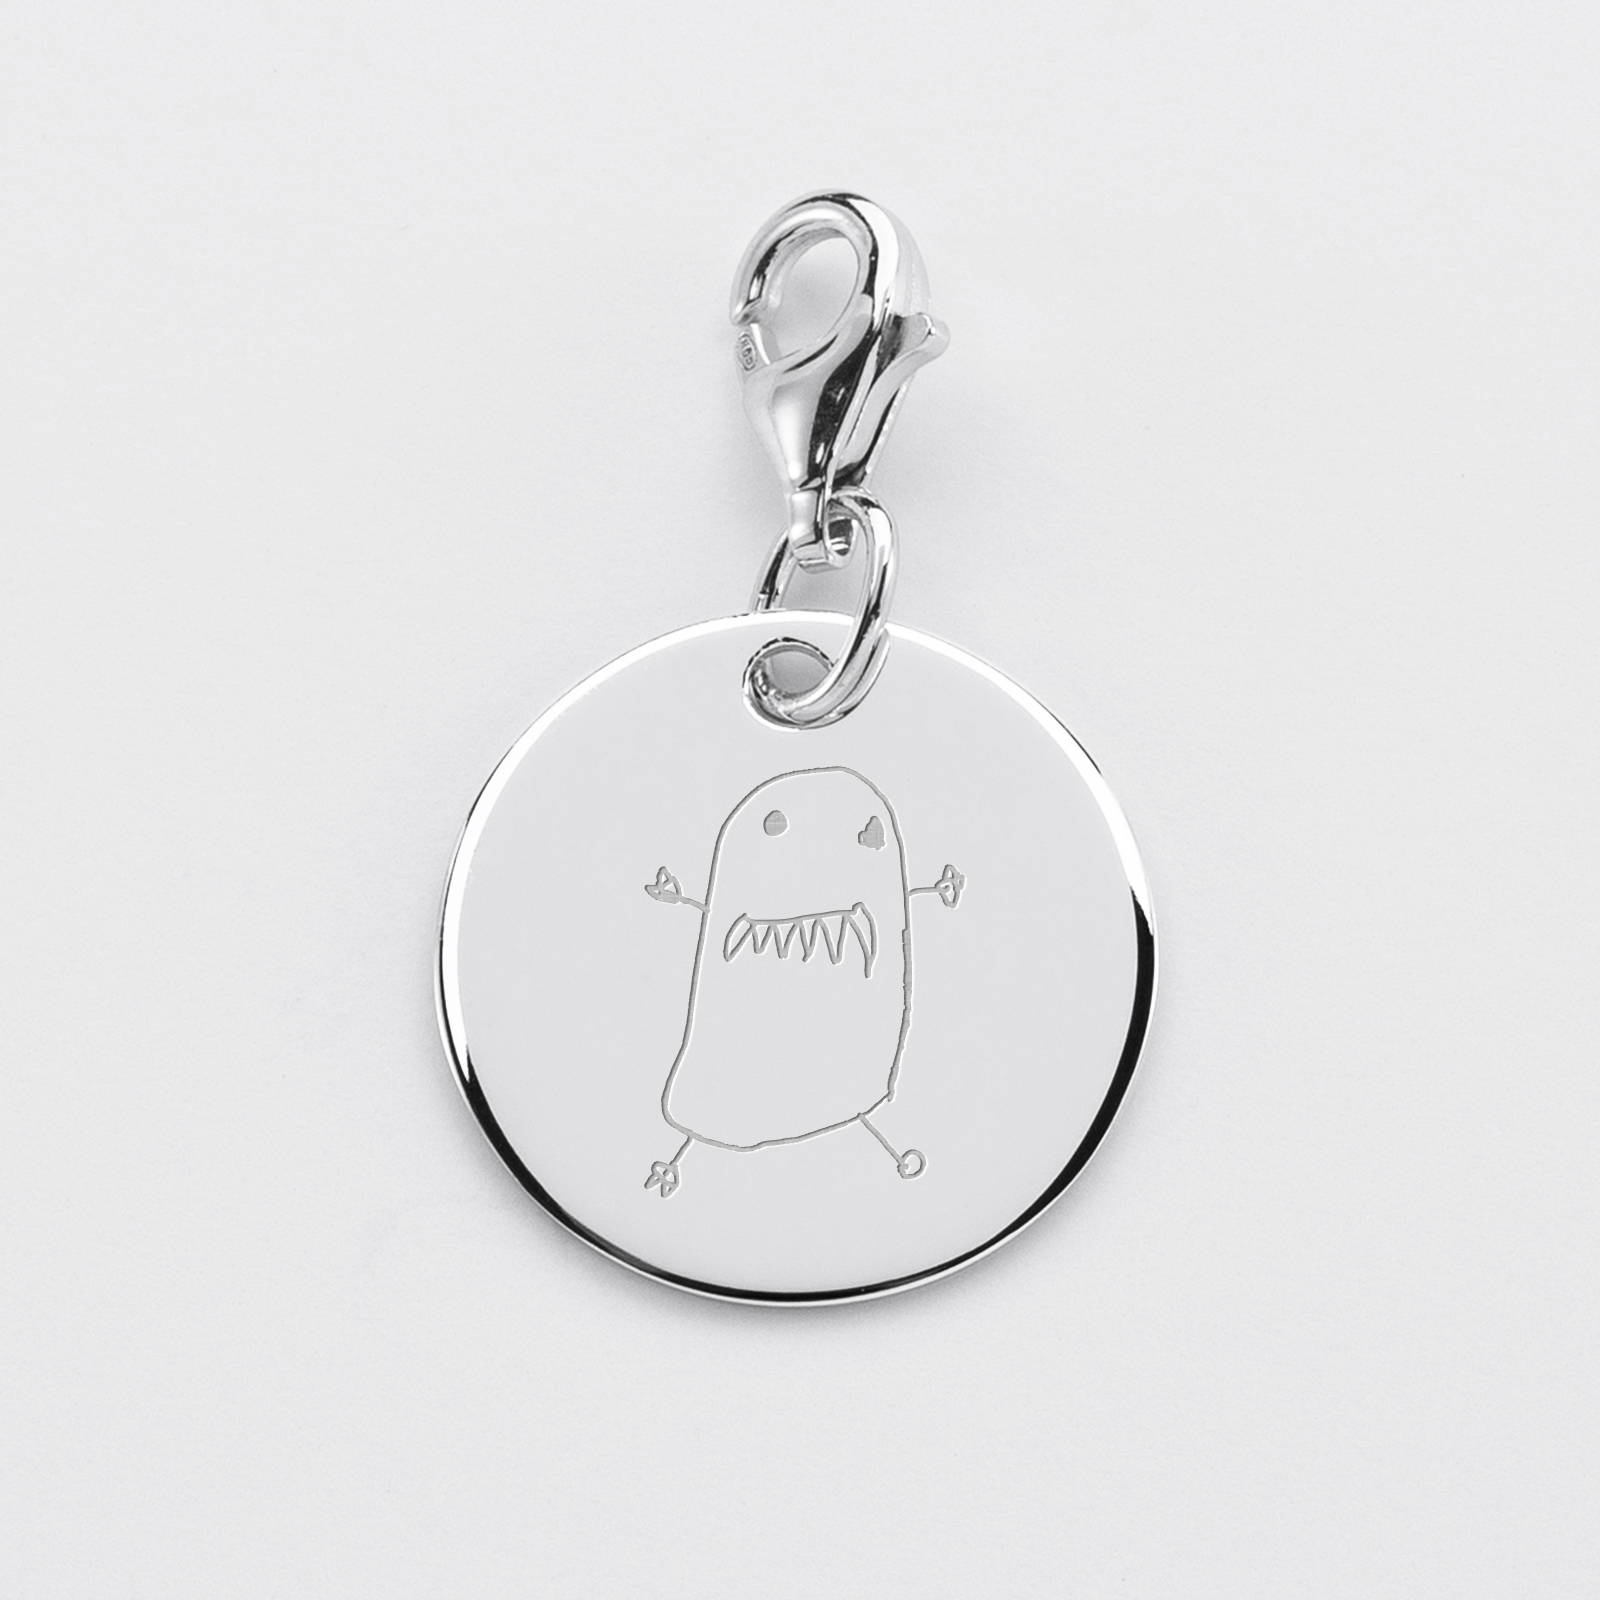 Silver engraved charm 17mm - sketch